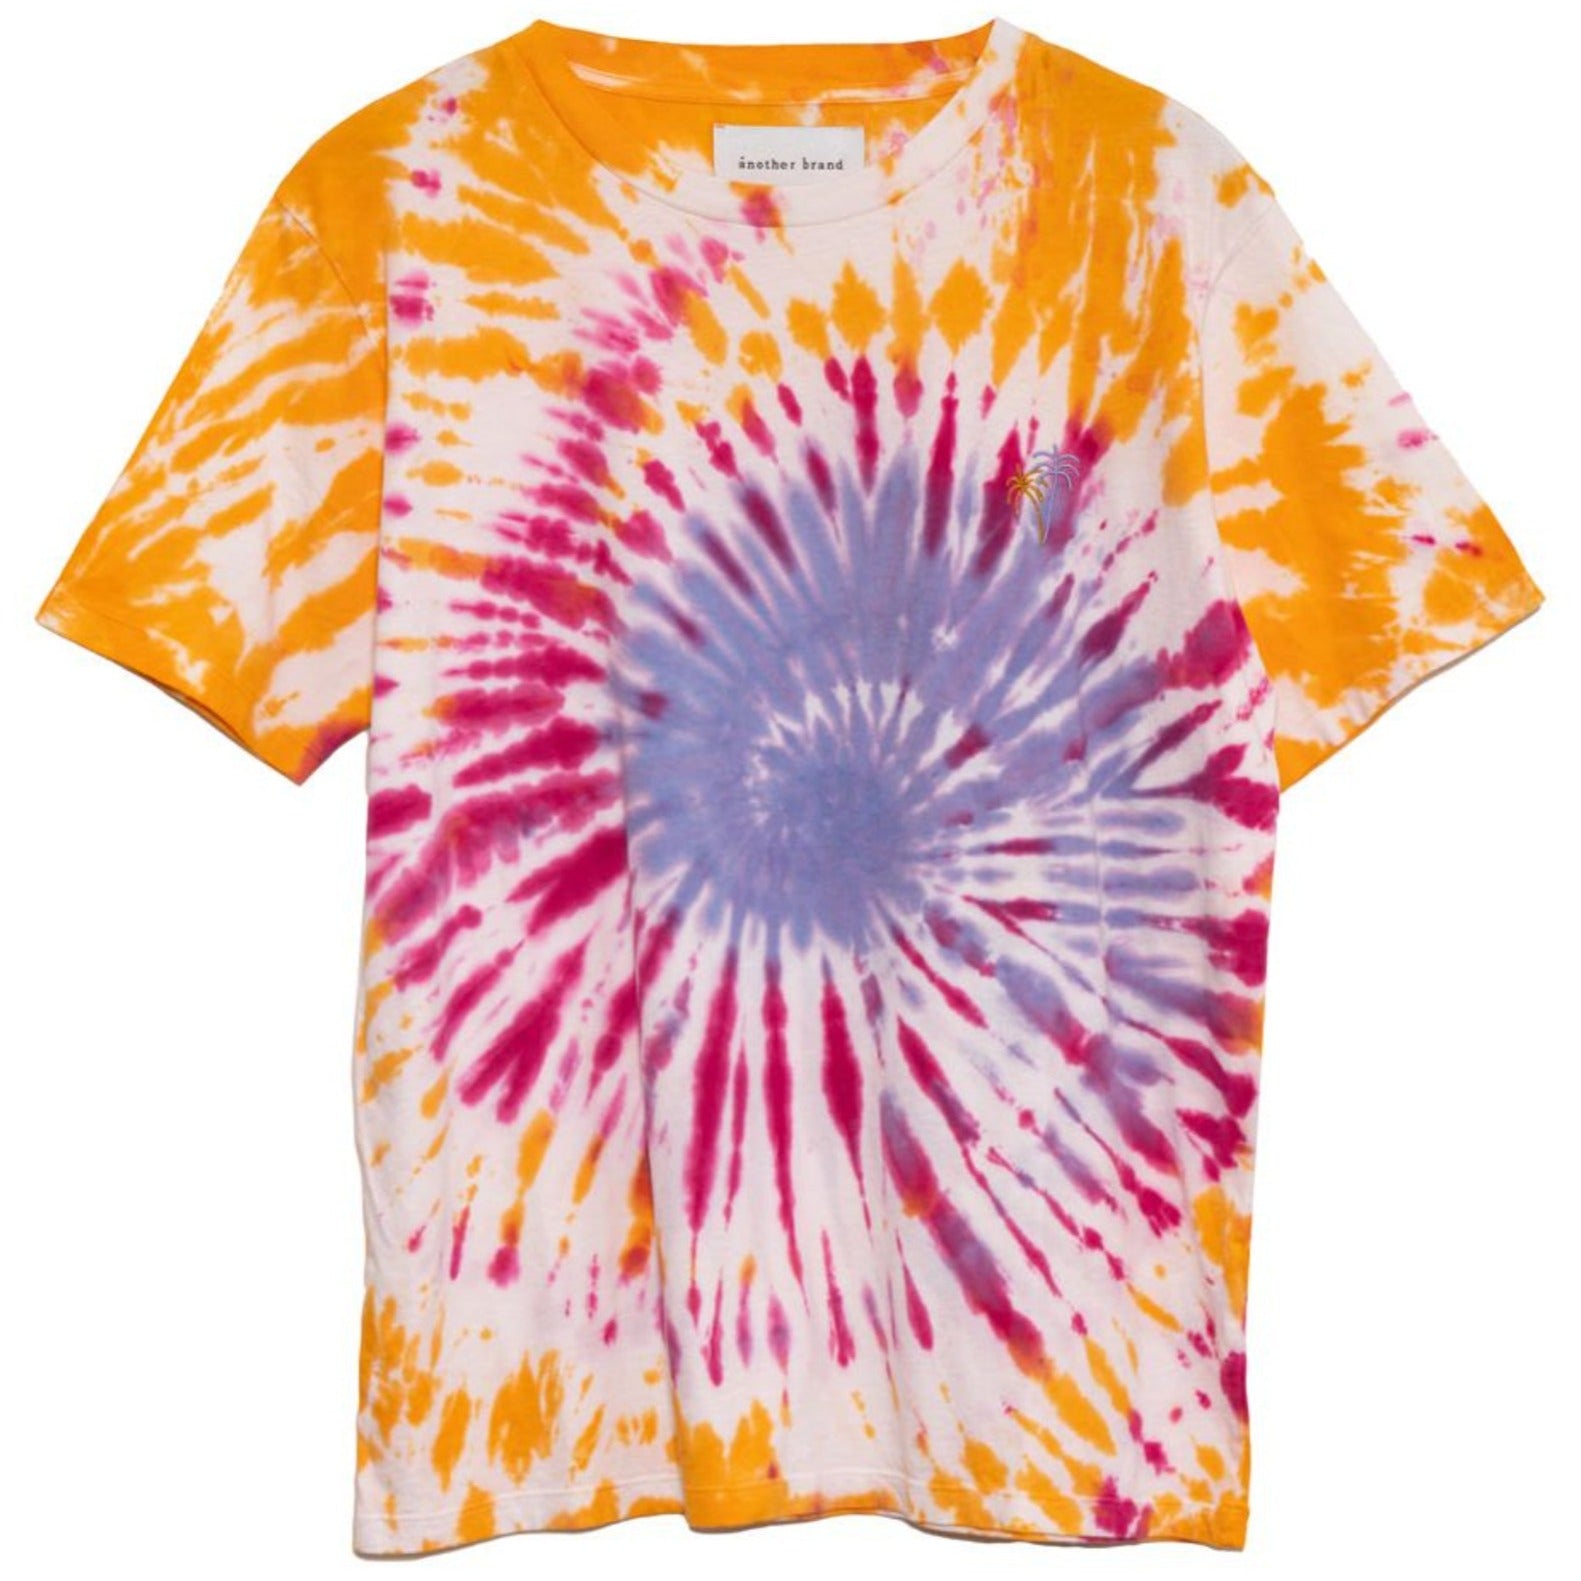 Another Brand T-Shirt "Tie Dye"